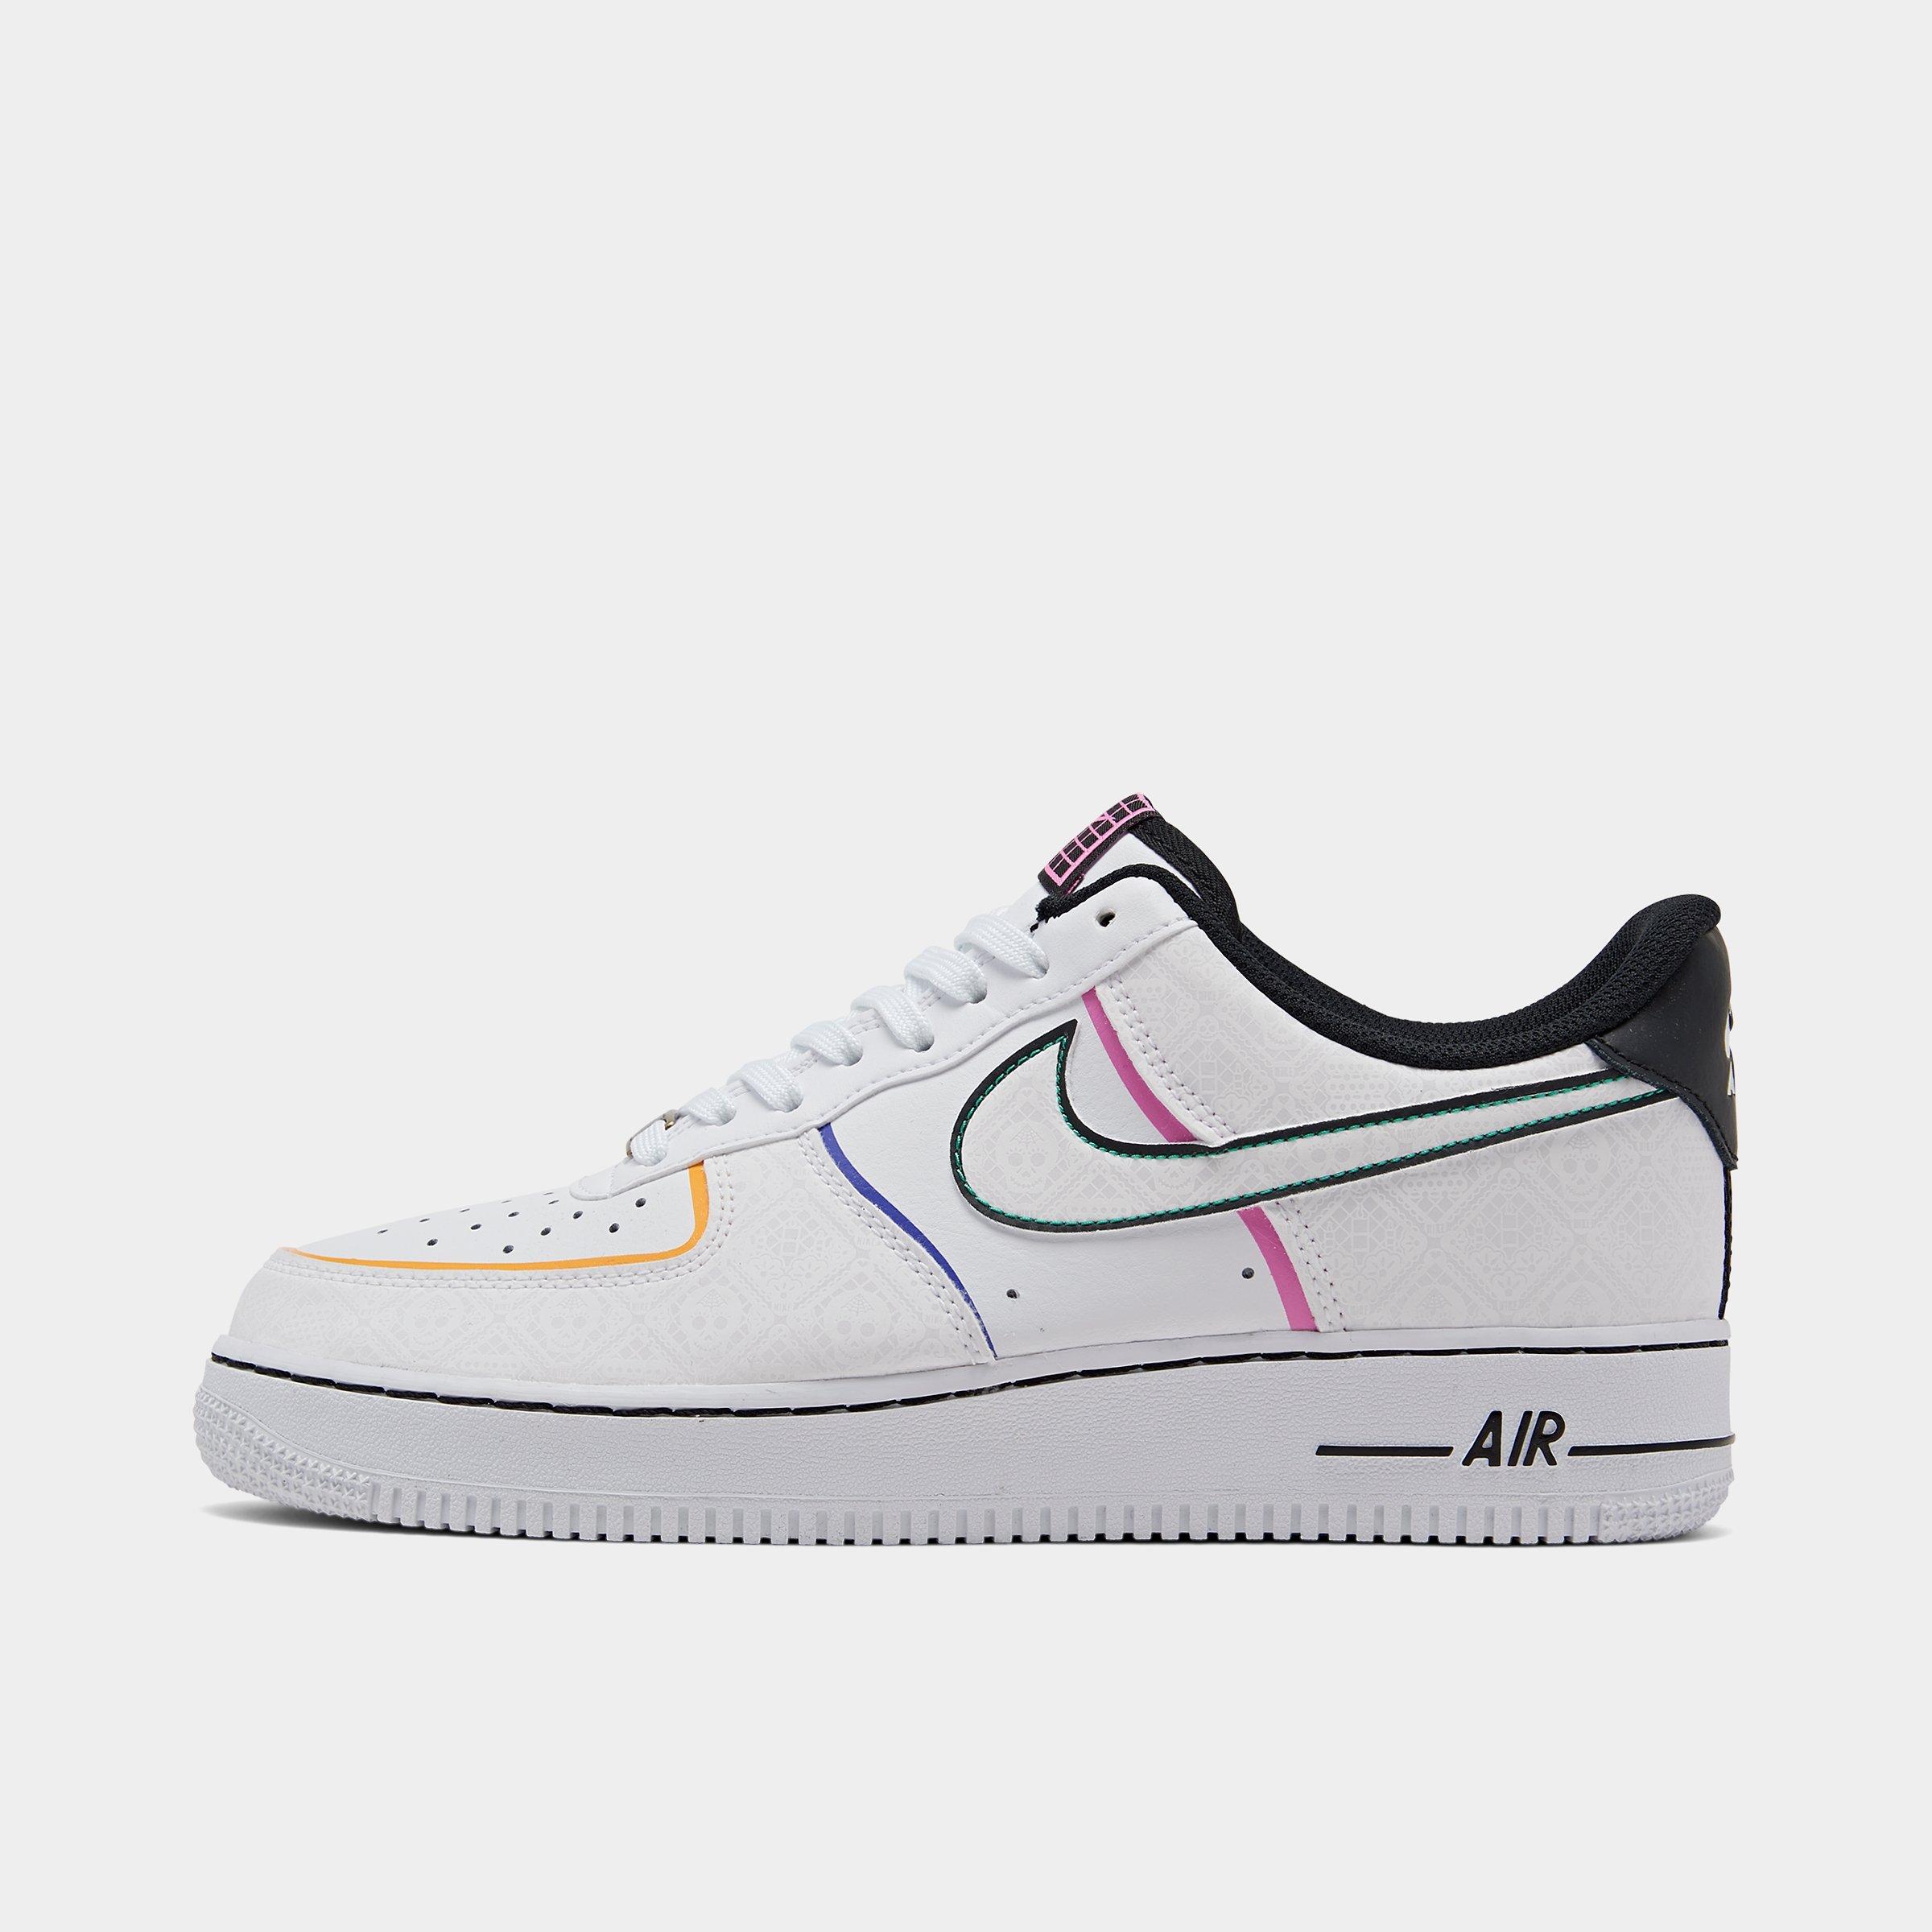 nike air force 1 07 finish line